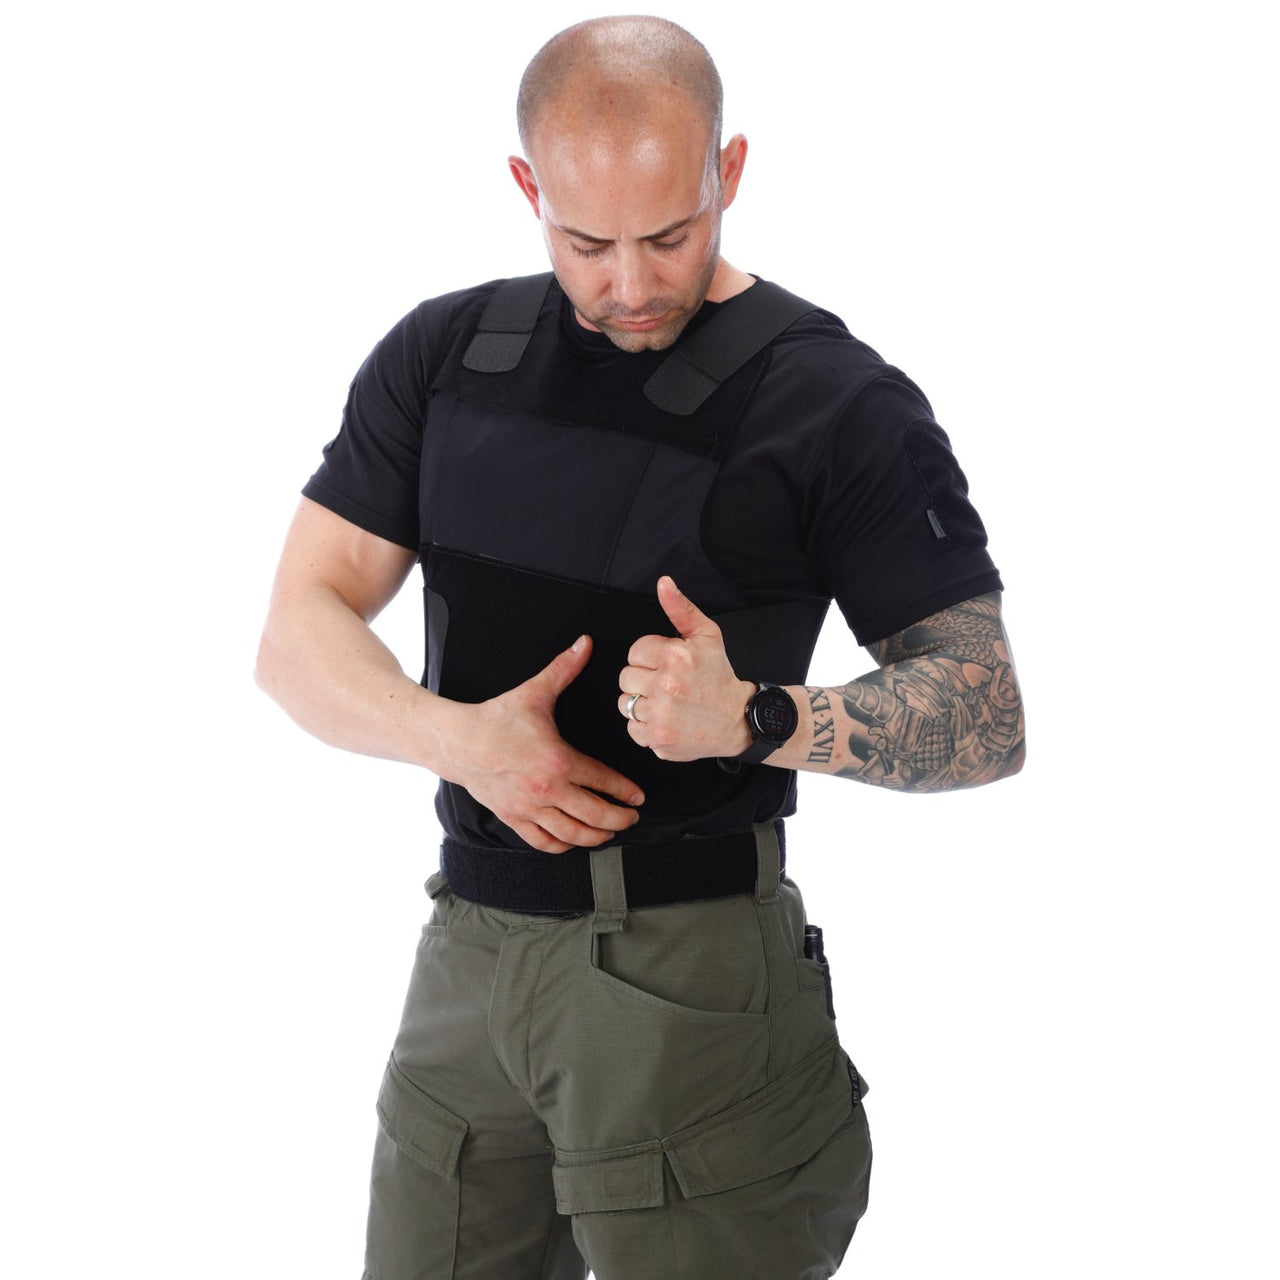 A man wearing a black t - shirt and green pants was spotted wearing the Body Armor Direct All American Concealable Enhanced Multi-Threat Vest, manufactured by Body Armor Direct.